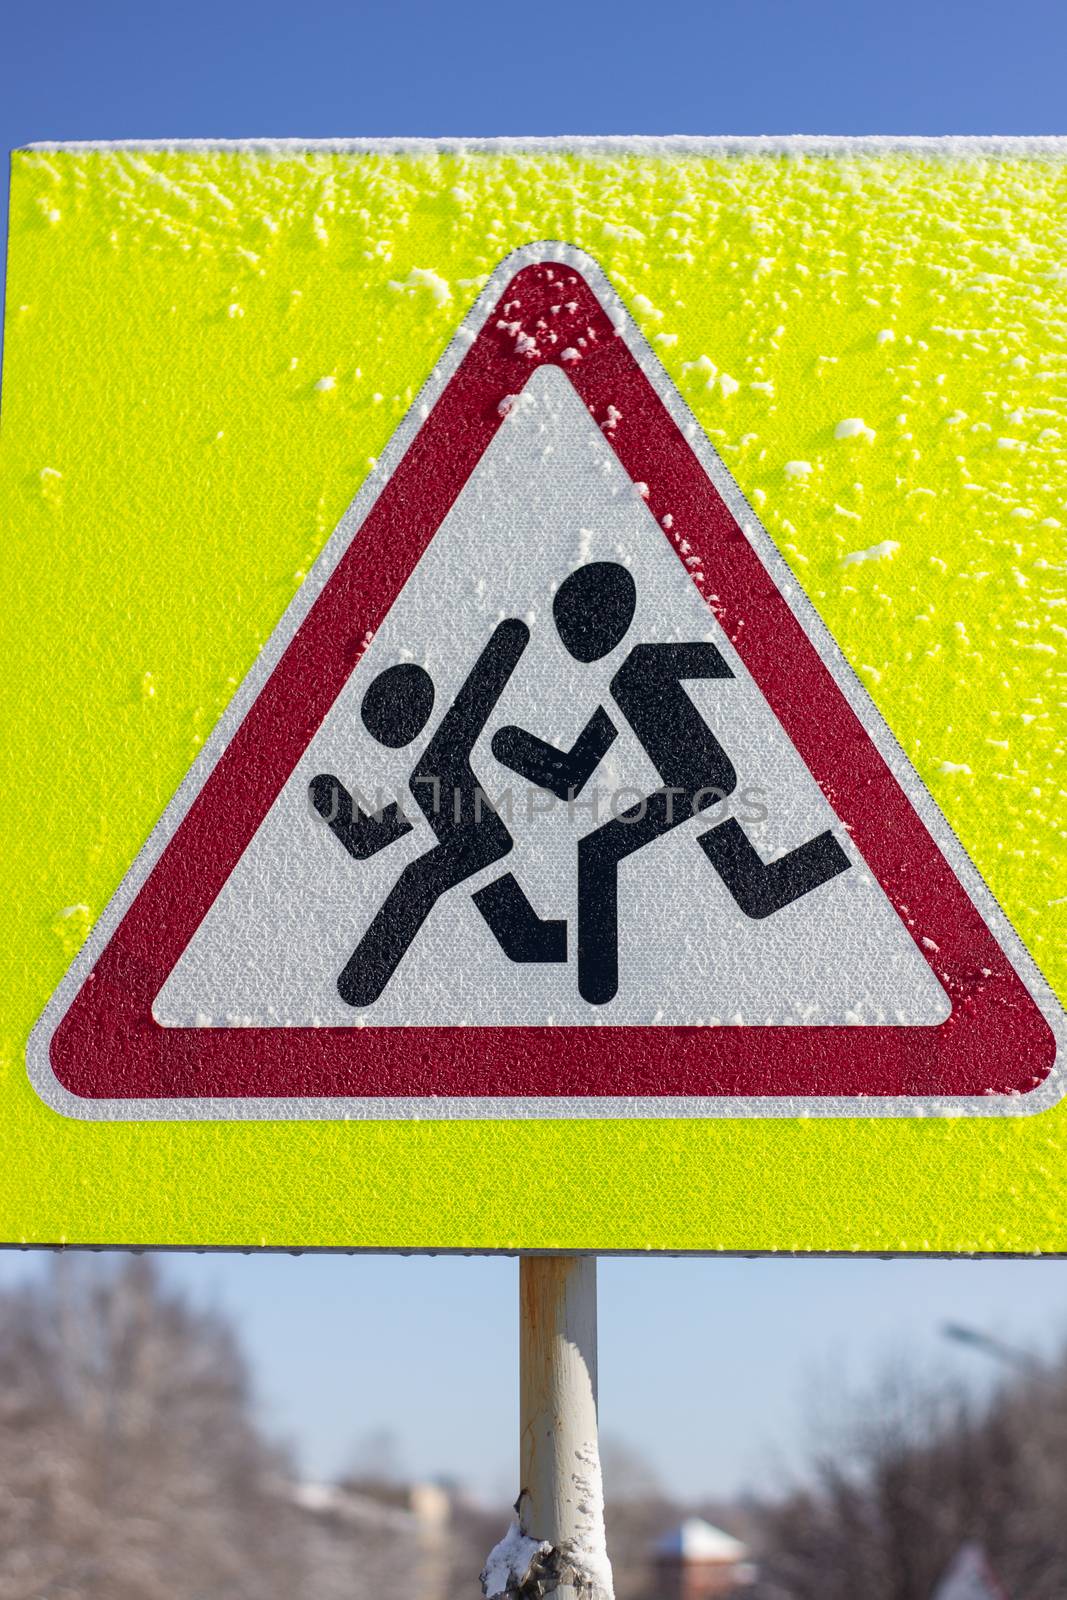 Pedestrian crossing sign on a yellow background. On a Sunny winter day. by AnatoliiFoto